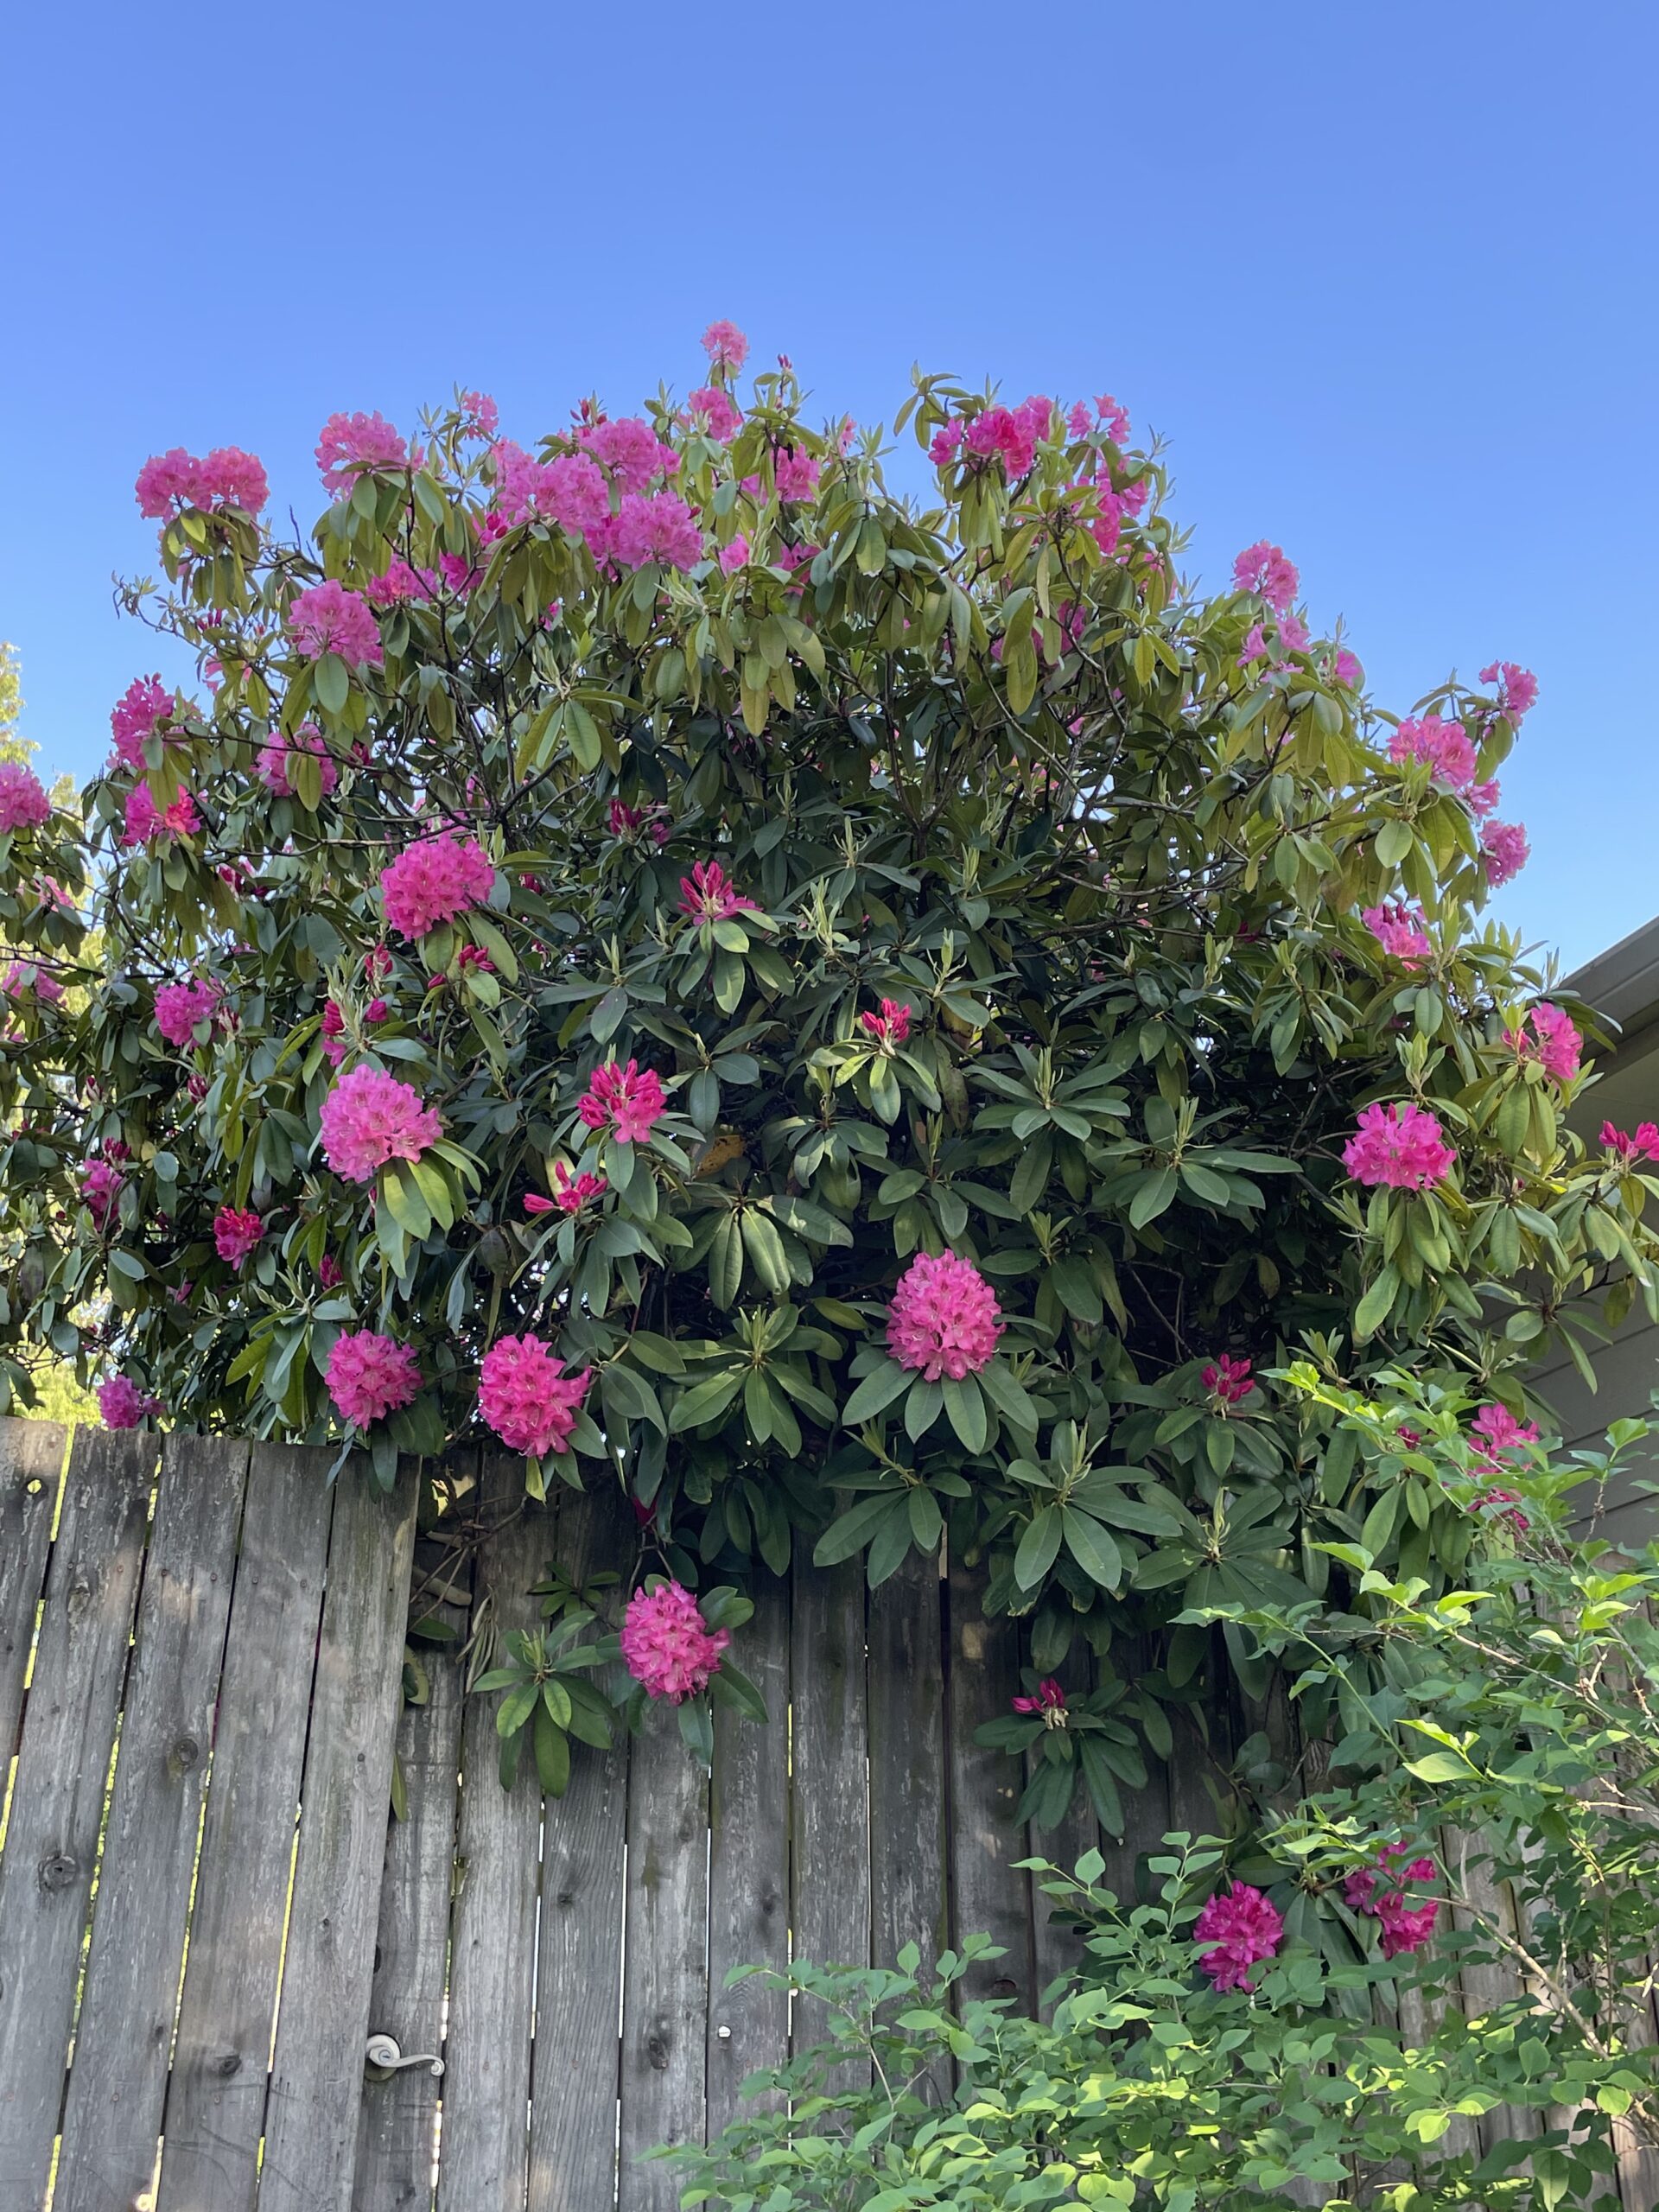 Tree-sized rhododendron in full bloom, with vibrant, deep-pink blooms, spilling over the top of a fence